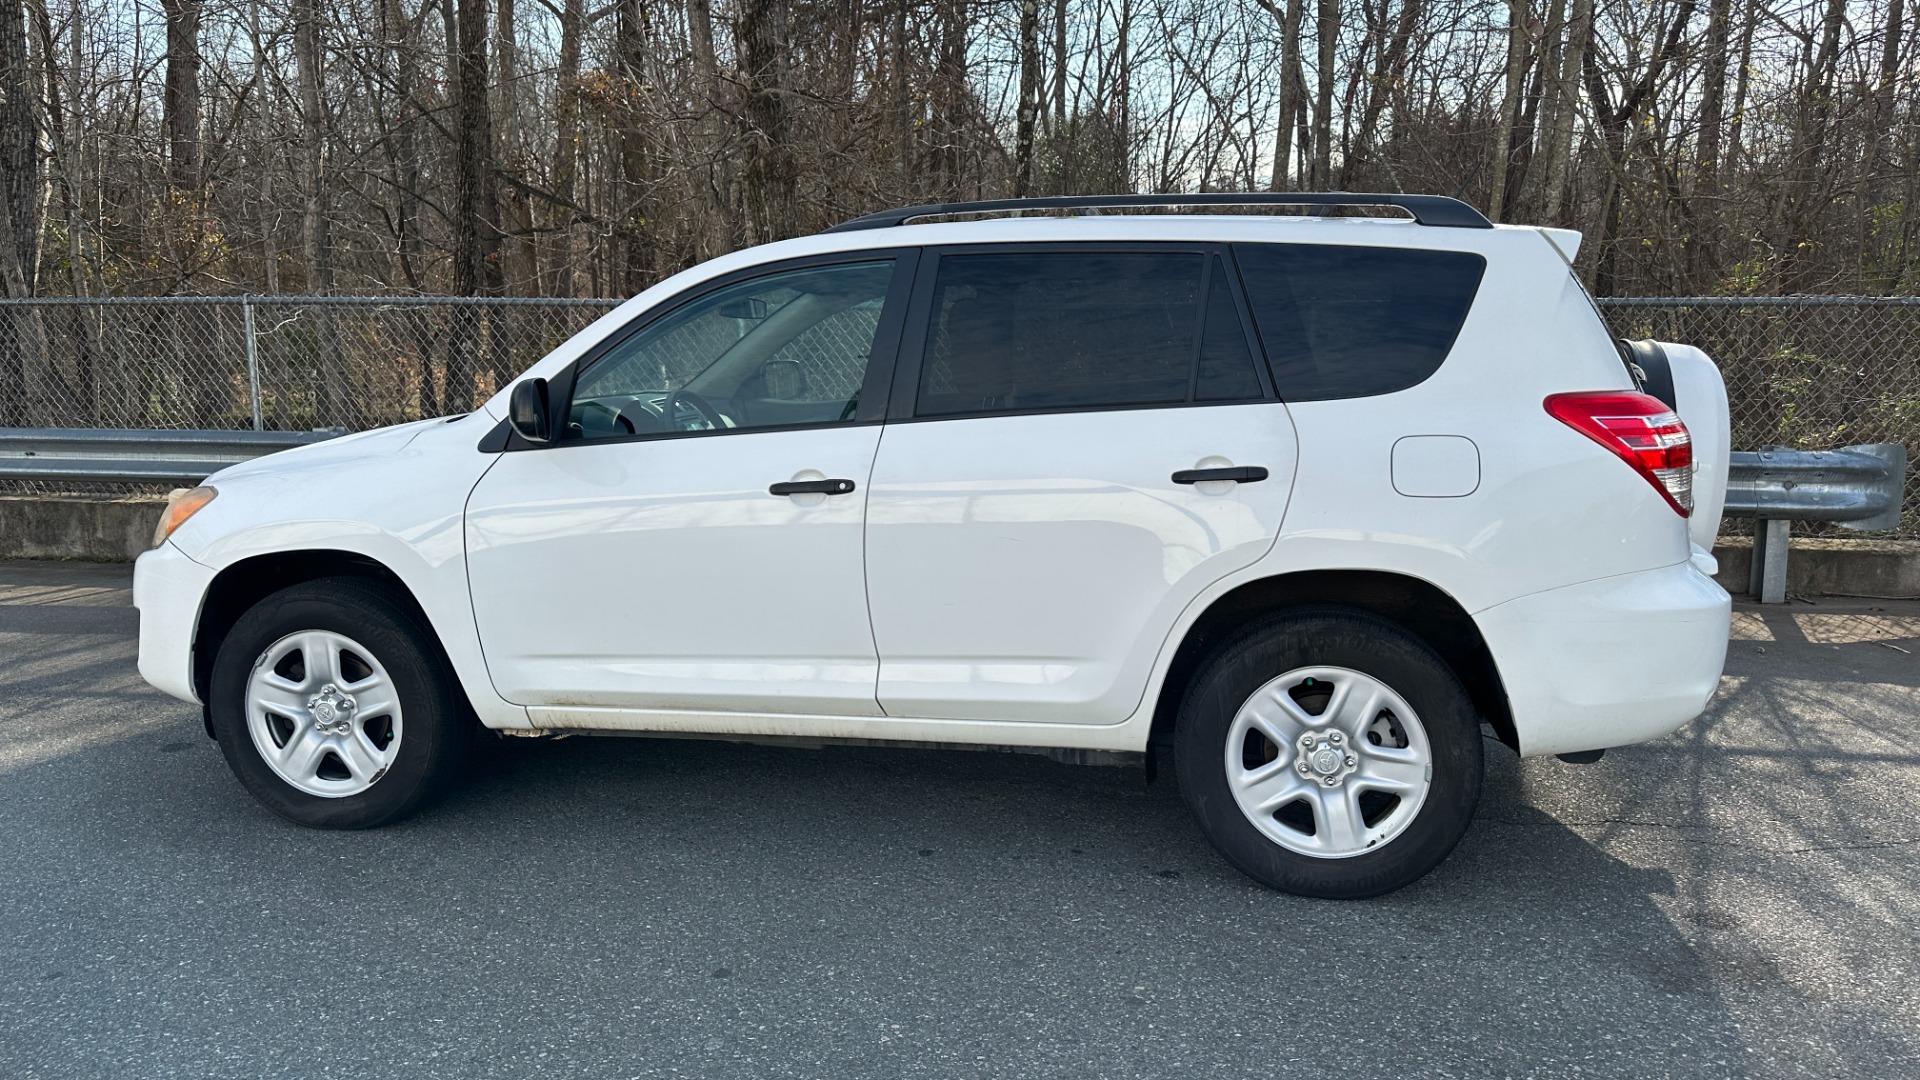 Used 2012 Toyota RAV4 4X4 / VALUE PACKAGE / ROOF RACK / TOW PACKAGE / DAYTIME RUNNING LIGHTS for sale Sold at Formula Imports in Charlotte NC 28227 6